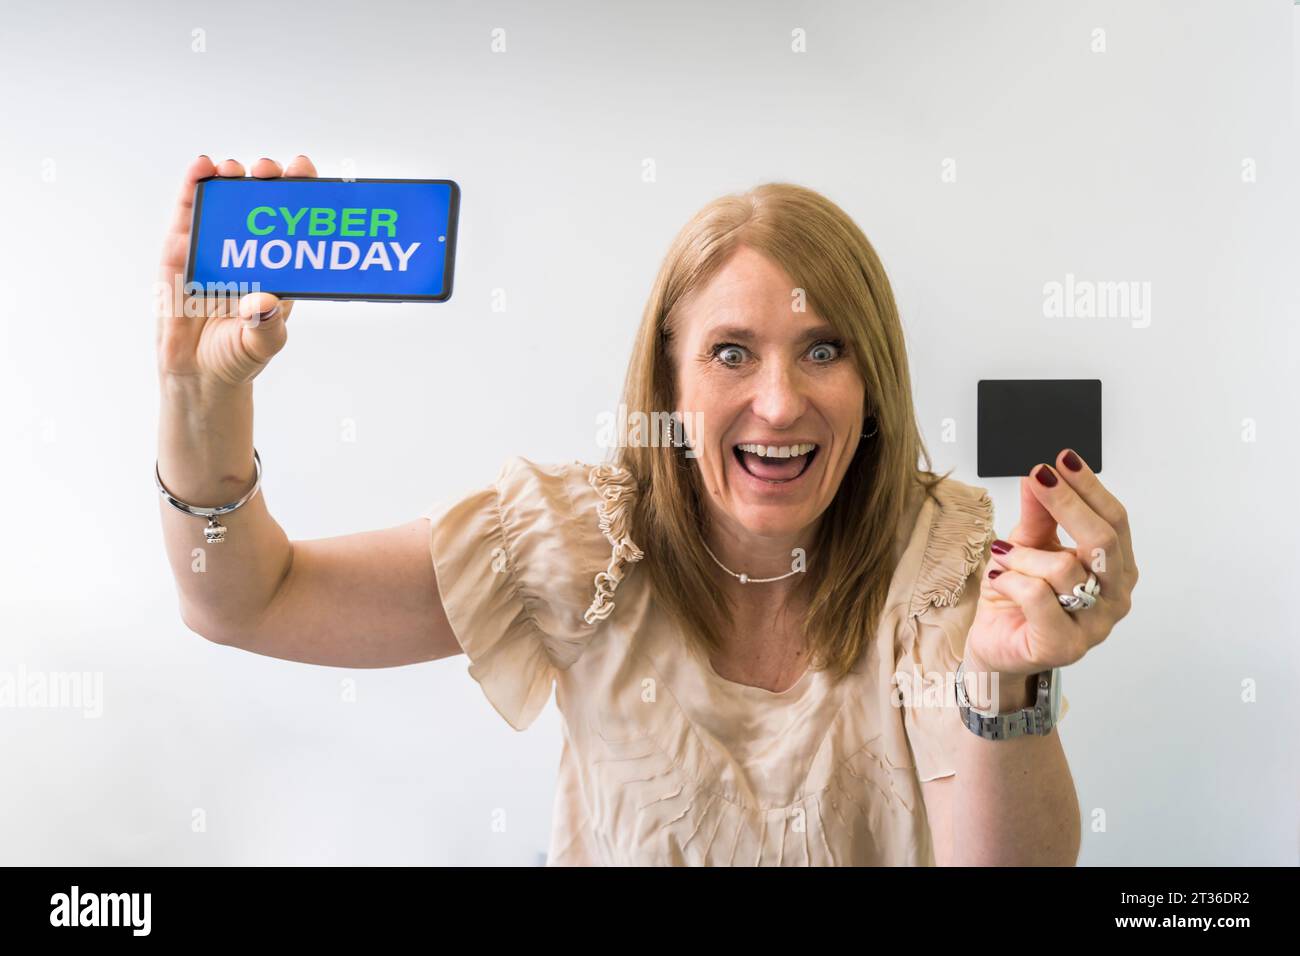 Crazy woman holding mobile phone with Cyber Monday advertisement on the screen and a credit card mock-up. Stock Photo